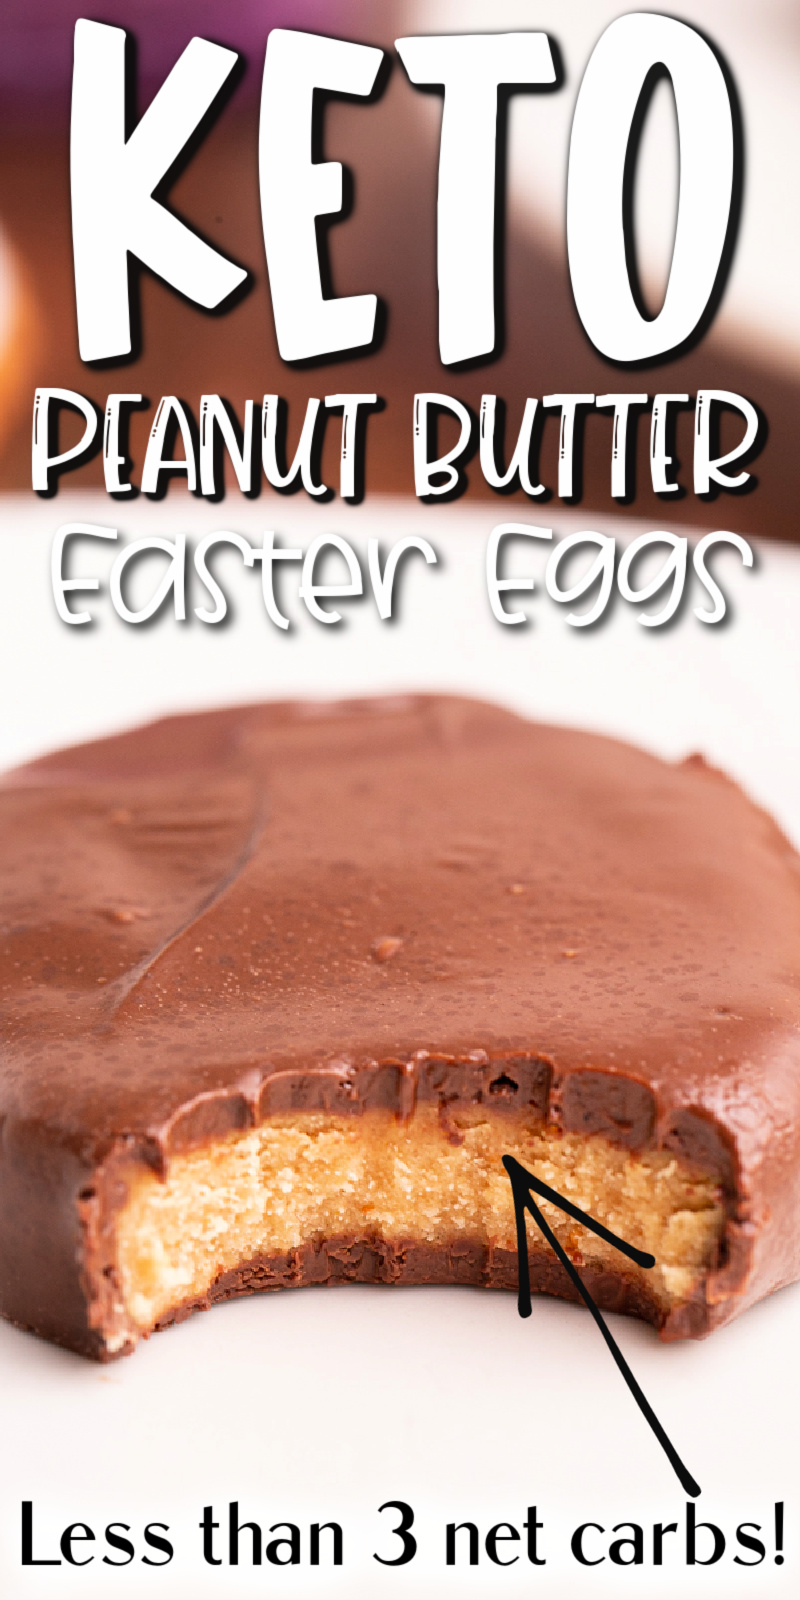 Keto Peanut Butter Chocolate Easter Eggs - This Keto Peanut Butter Chocolate Easter Eggs recipe is the perfect low carb and gluten-free Easter treat. Sweet creamy peanut butter on the inside with that delicious chocolate coating, who needs Reeses when you have these? #keto #lowcarb #glutenfree #sugarfree #resses #peanutbutter #chocolate #easter #eggs #recipe